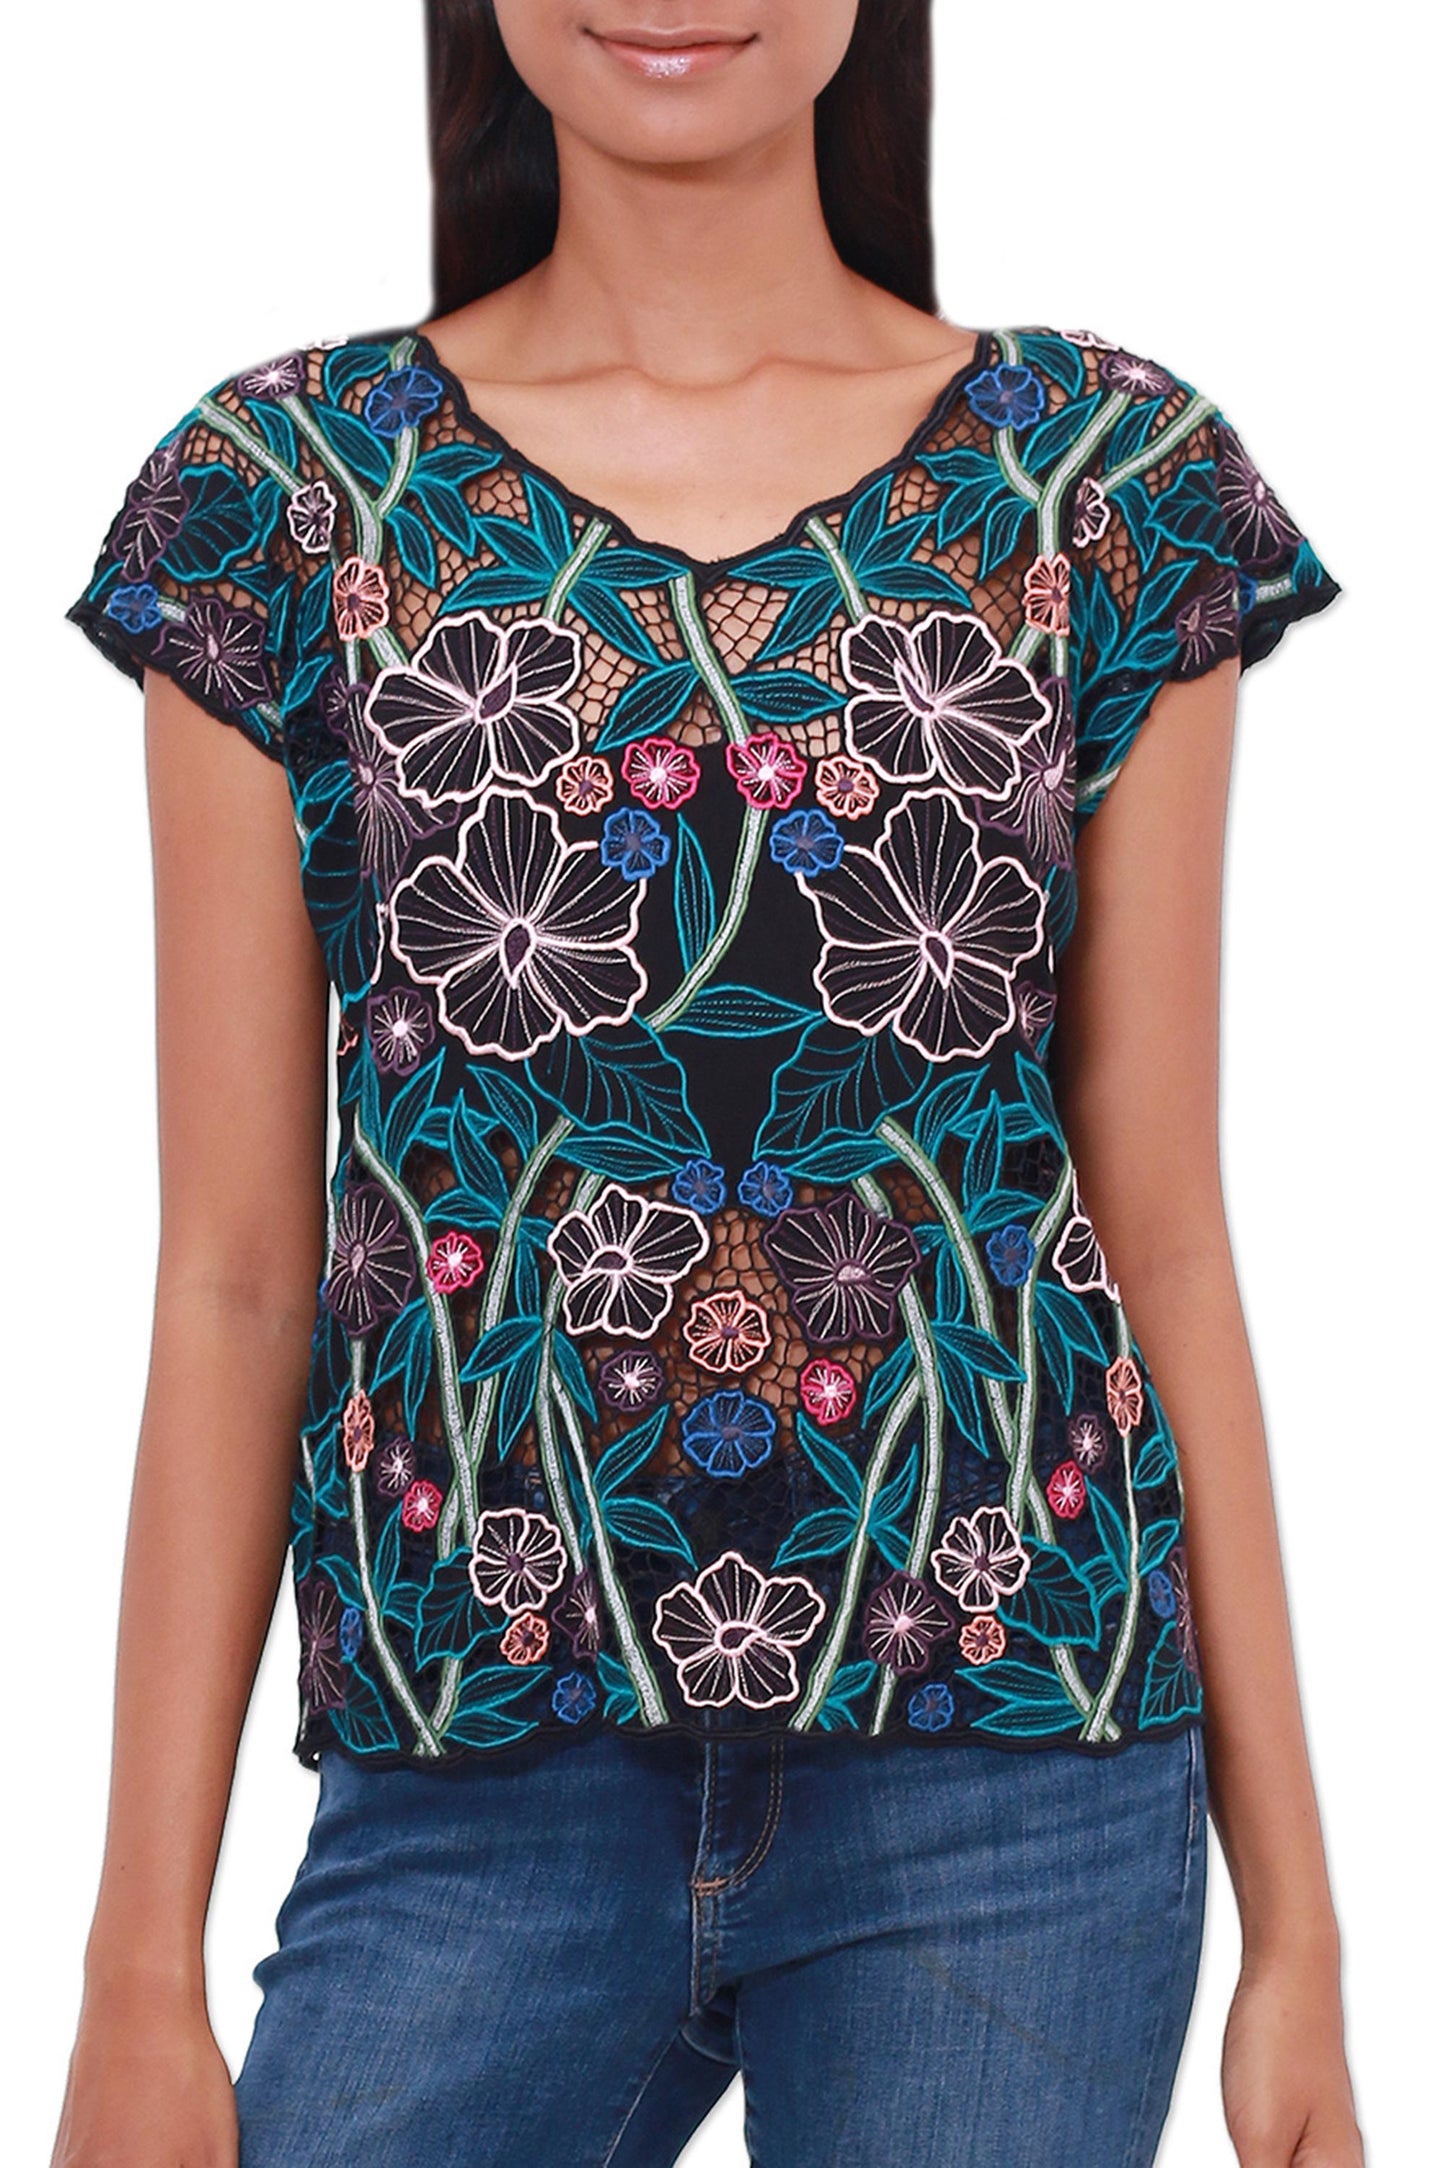 Lovely Garden Floral Embroidered Rayon Blouse from Bali